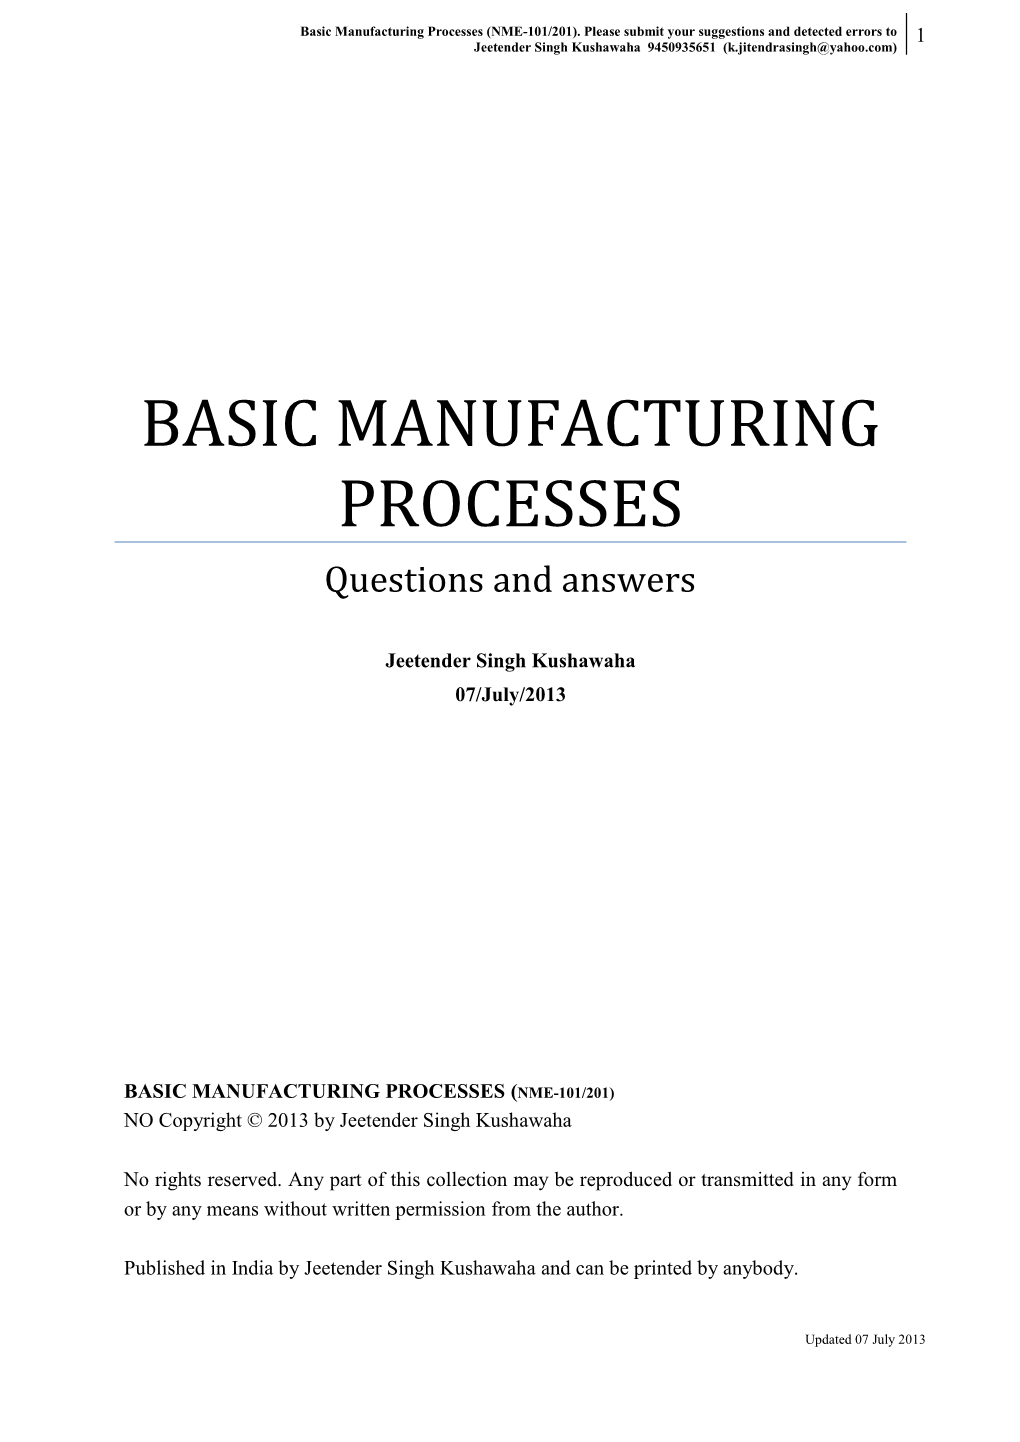 Basic Manufacturing Processes: Questions and Answers